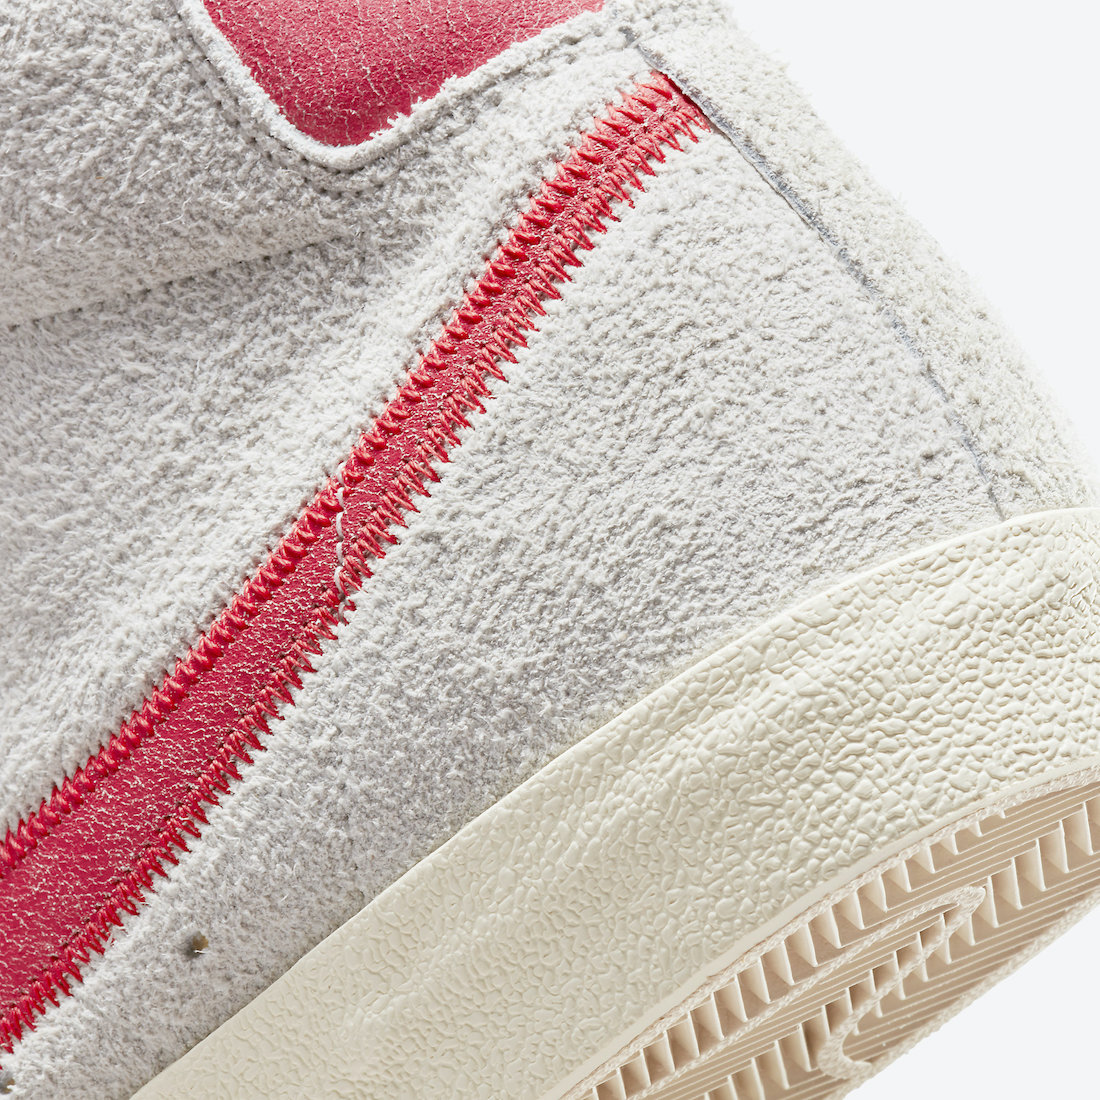 Nike Blazer Mid 77 Test of Time DO7225-100 Release Date